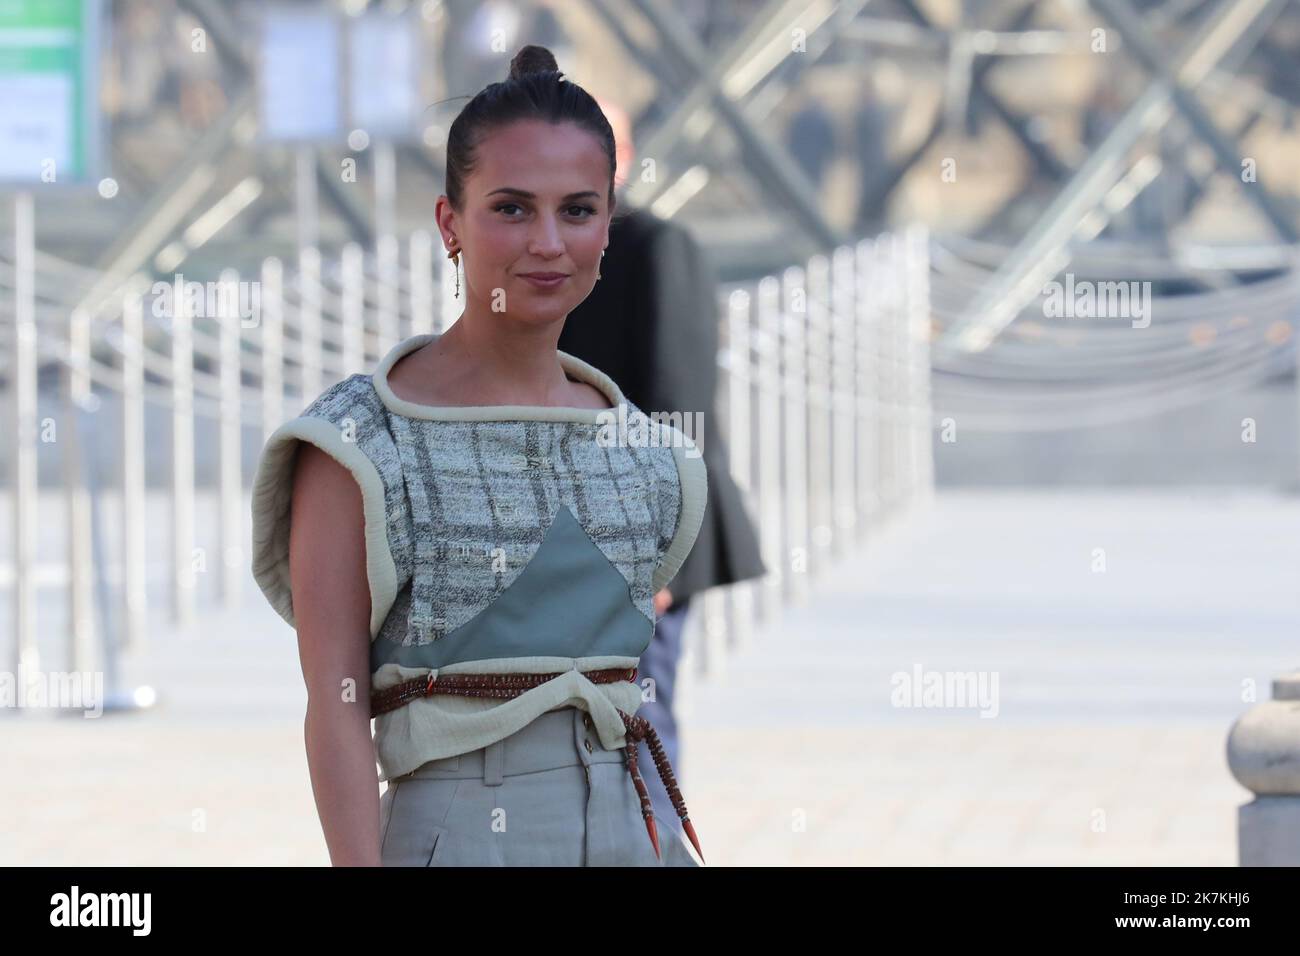 Louis Vuitton pays tribute to the youth in a fall-winter 2022-2023 show at  the Musée d'Orsay